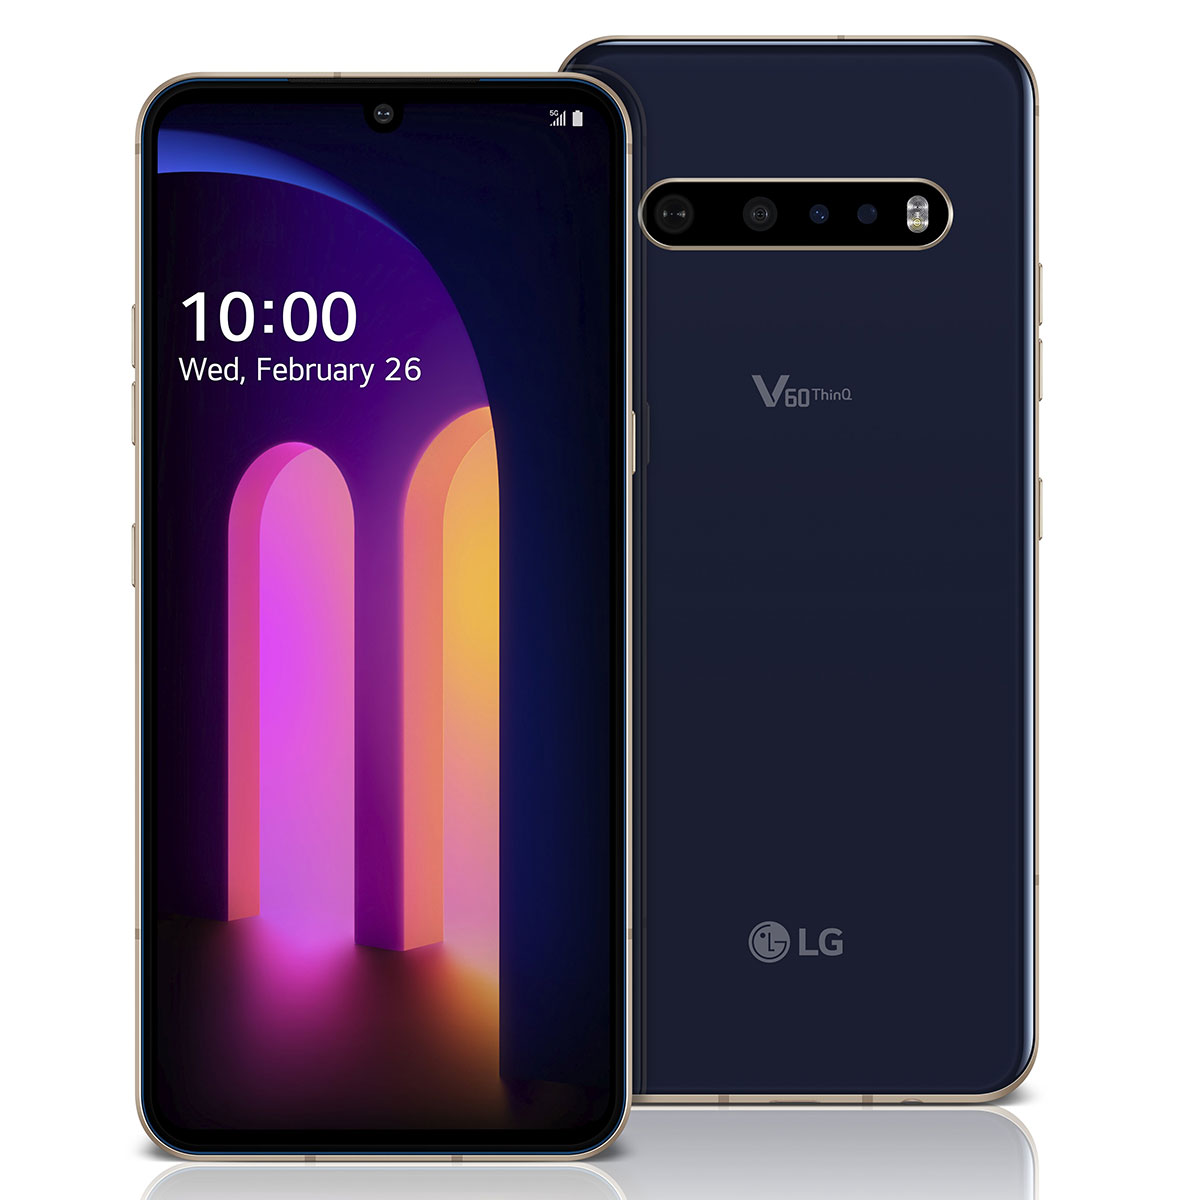 LG V60 ThinQ 5G gets bigger screen and battery, keeps 3.5mm